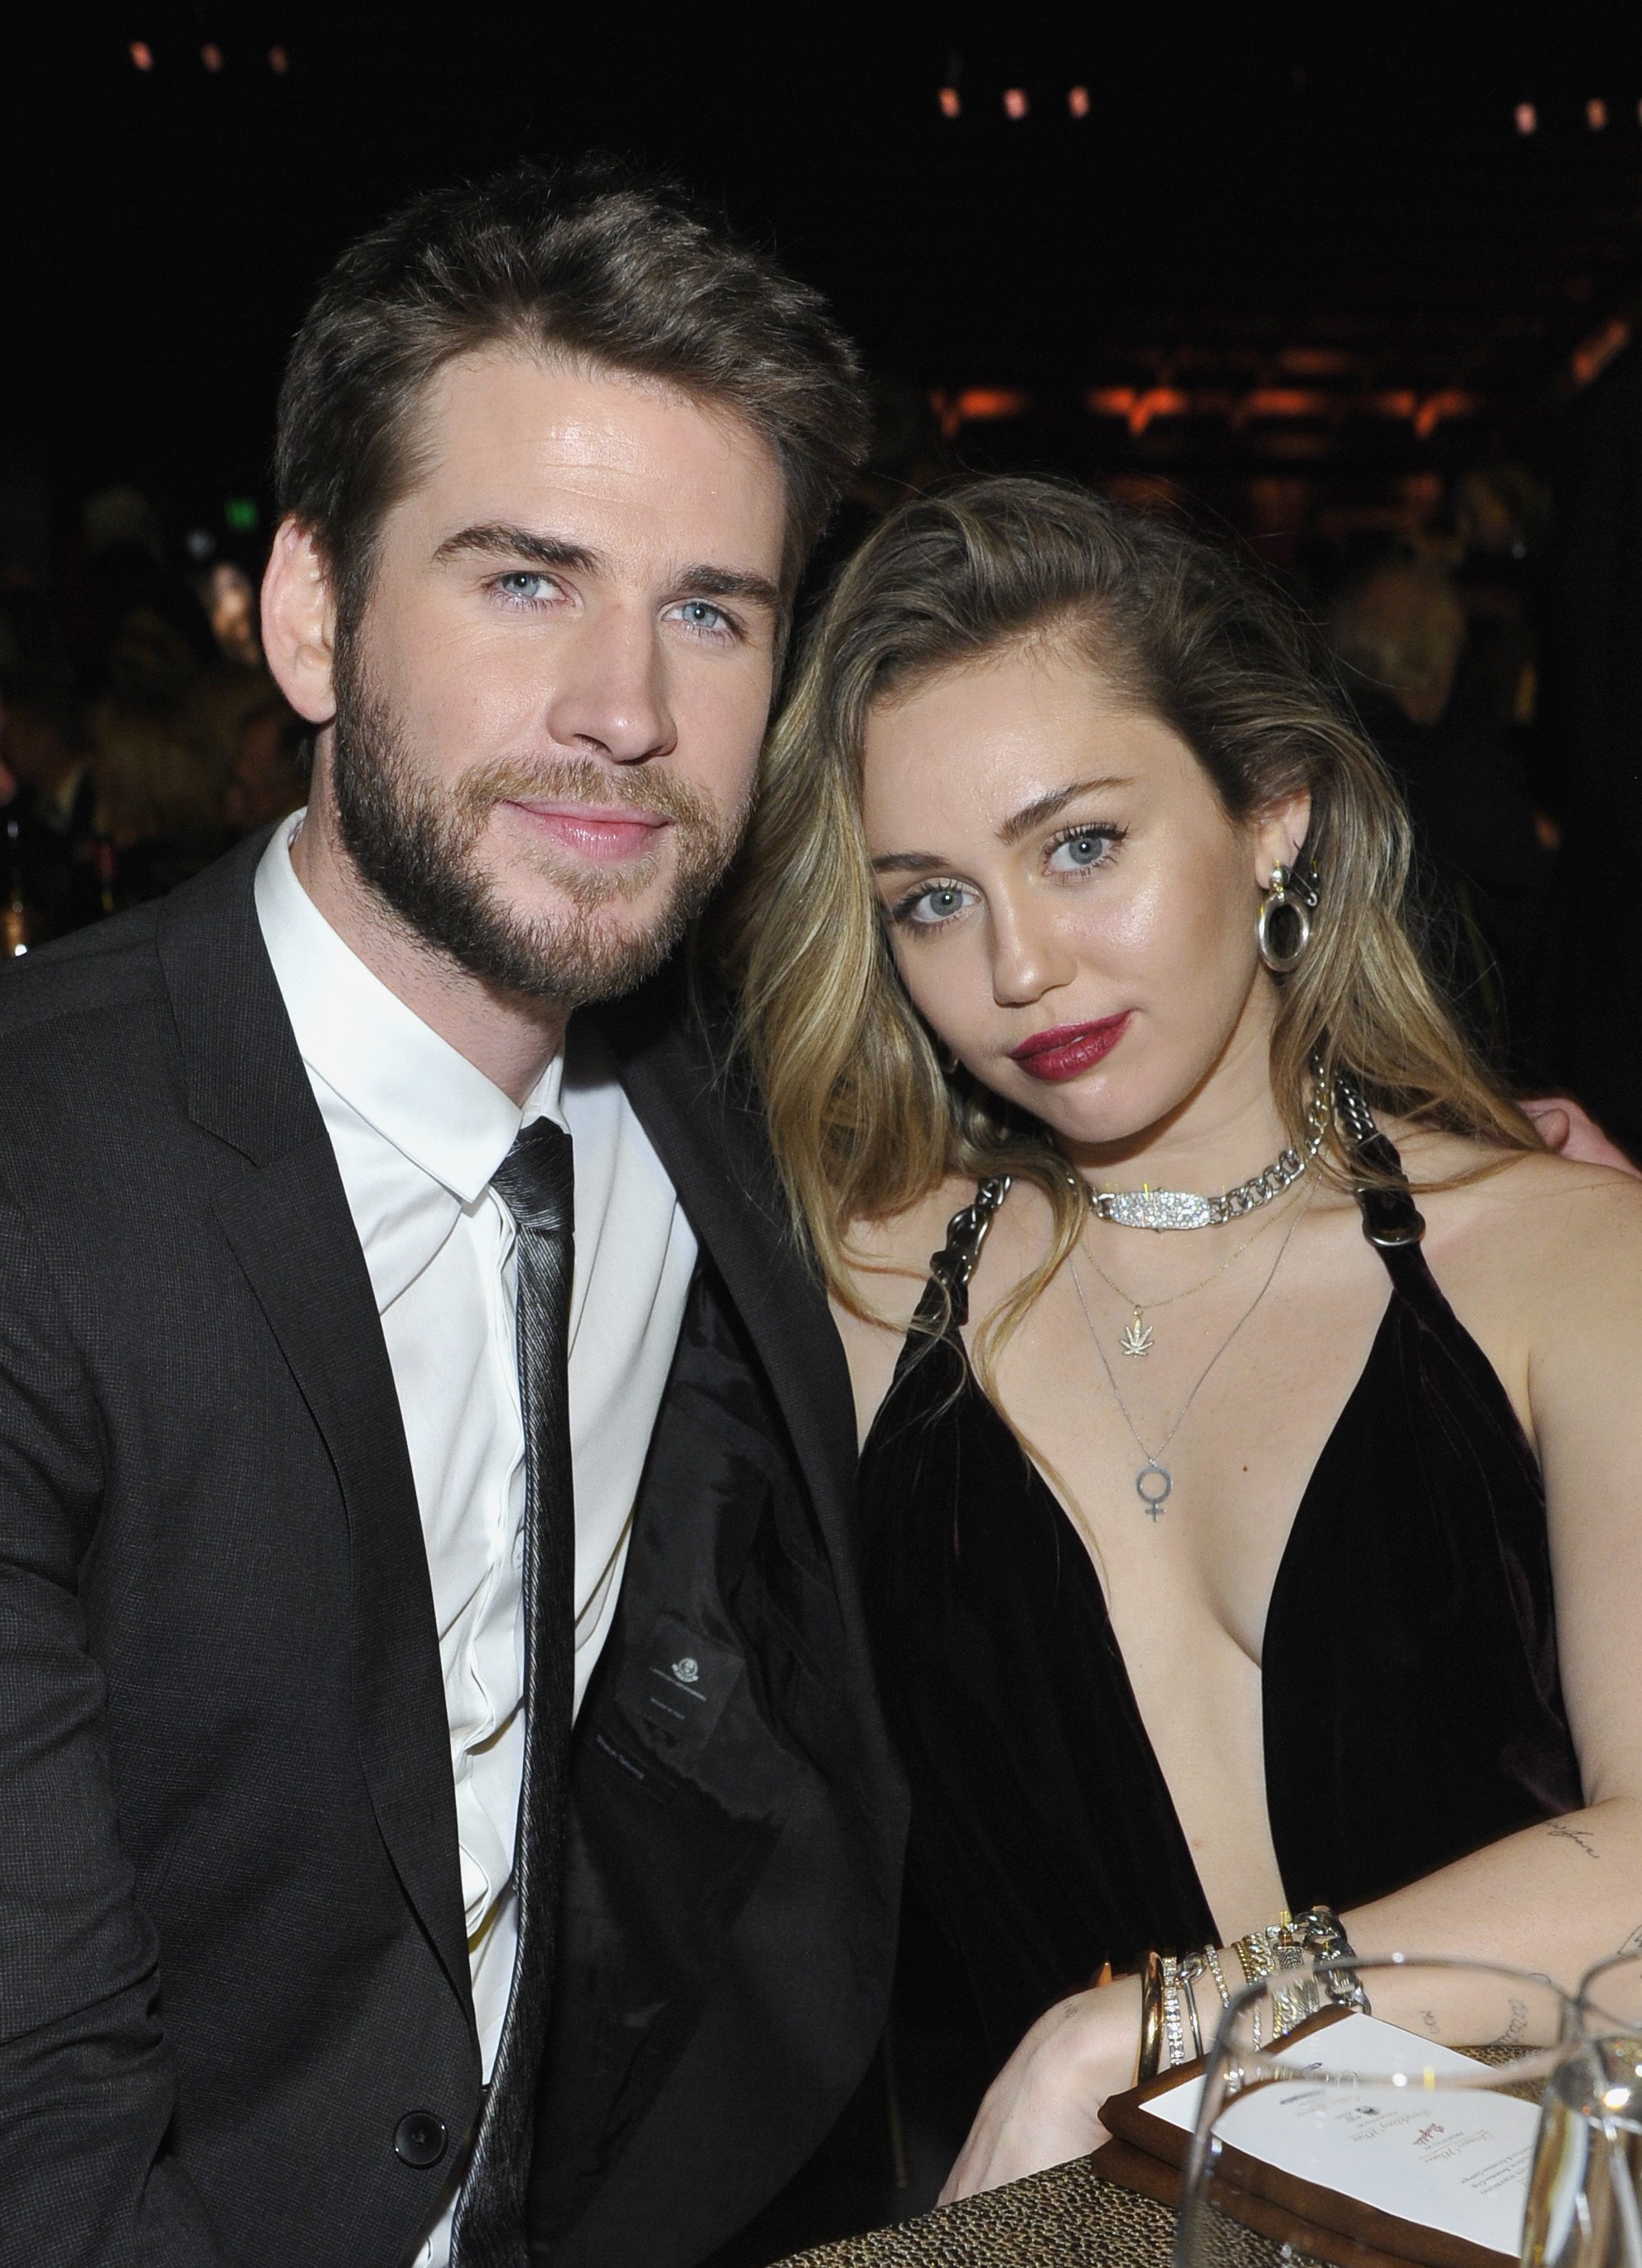 Liam Hemsworth and Miley Cyrus lean into each other as they pose for a photo at an event